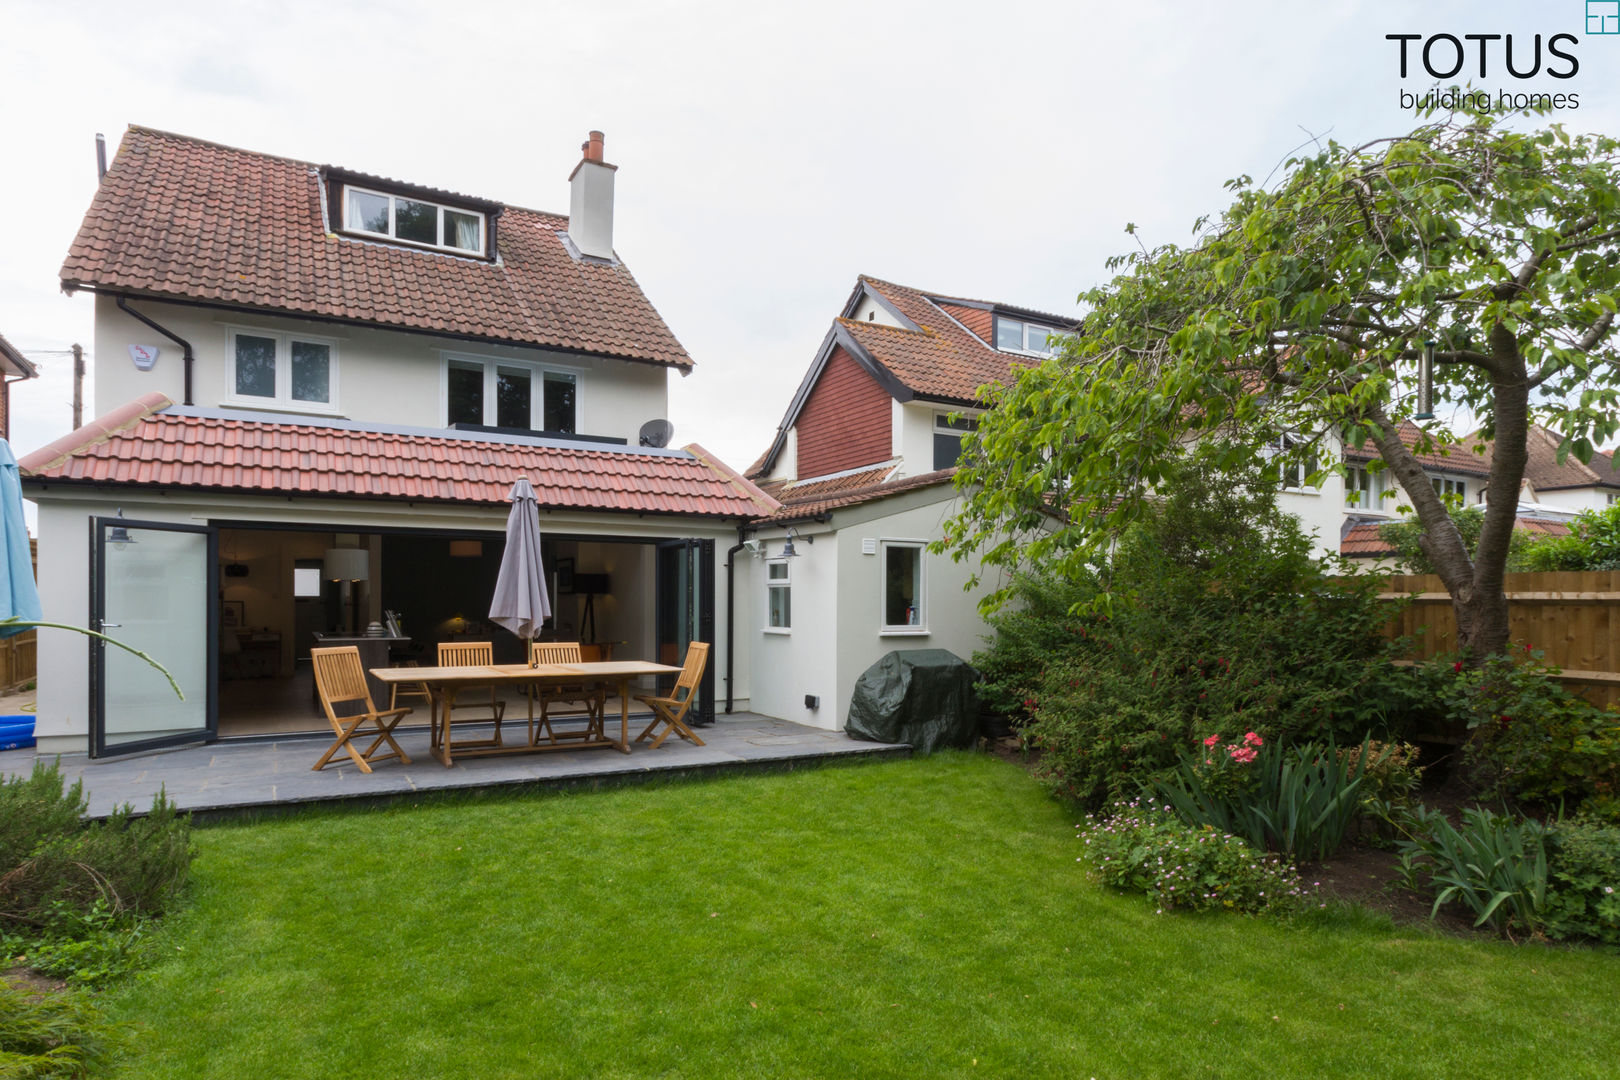 New life for a 1920s home - extension and full renovation, Thames Ditton, Surrey, TOTUS TOTUS บ้านและที่อยู่อาศัย